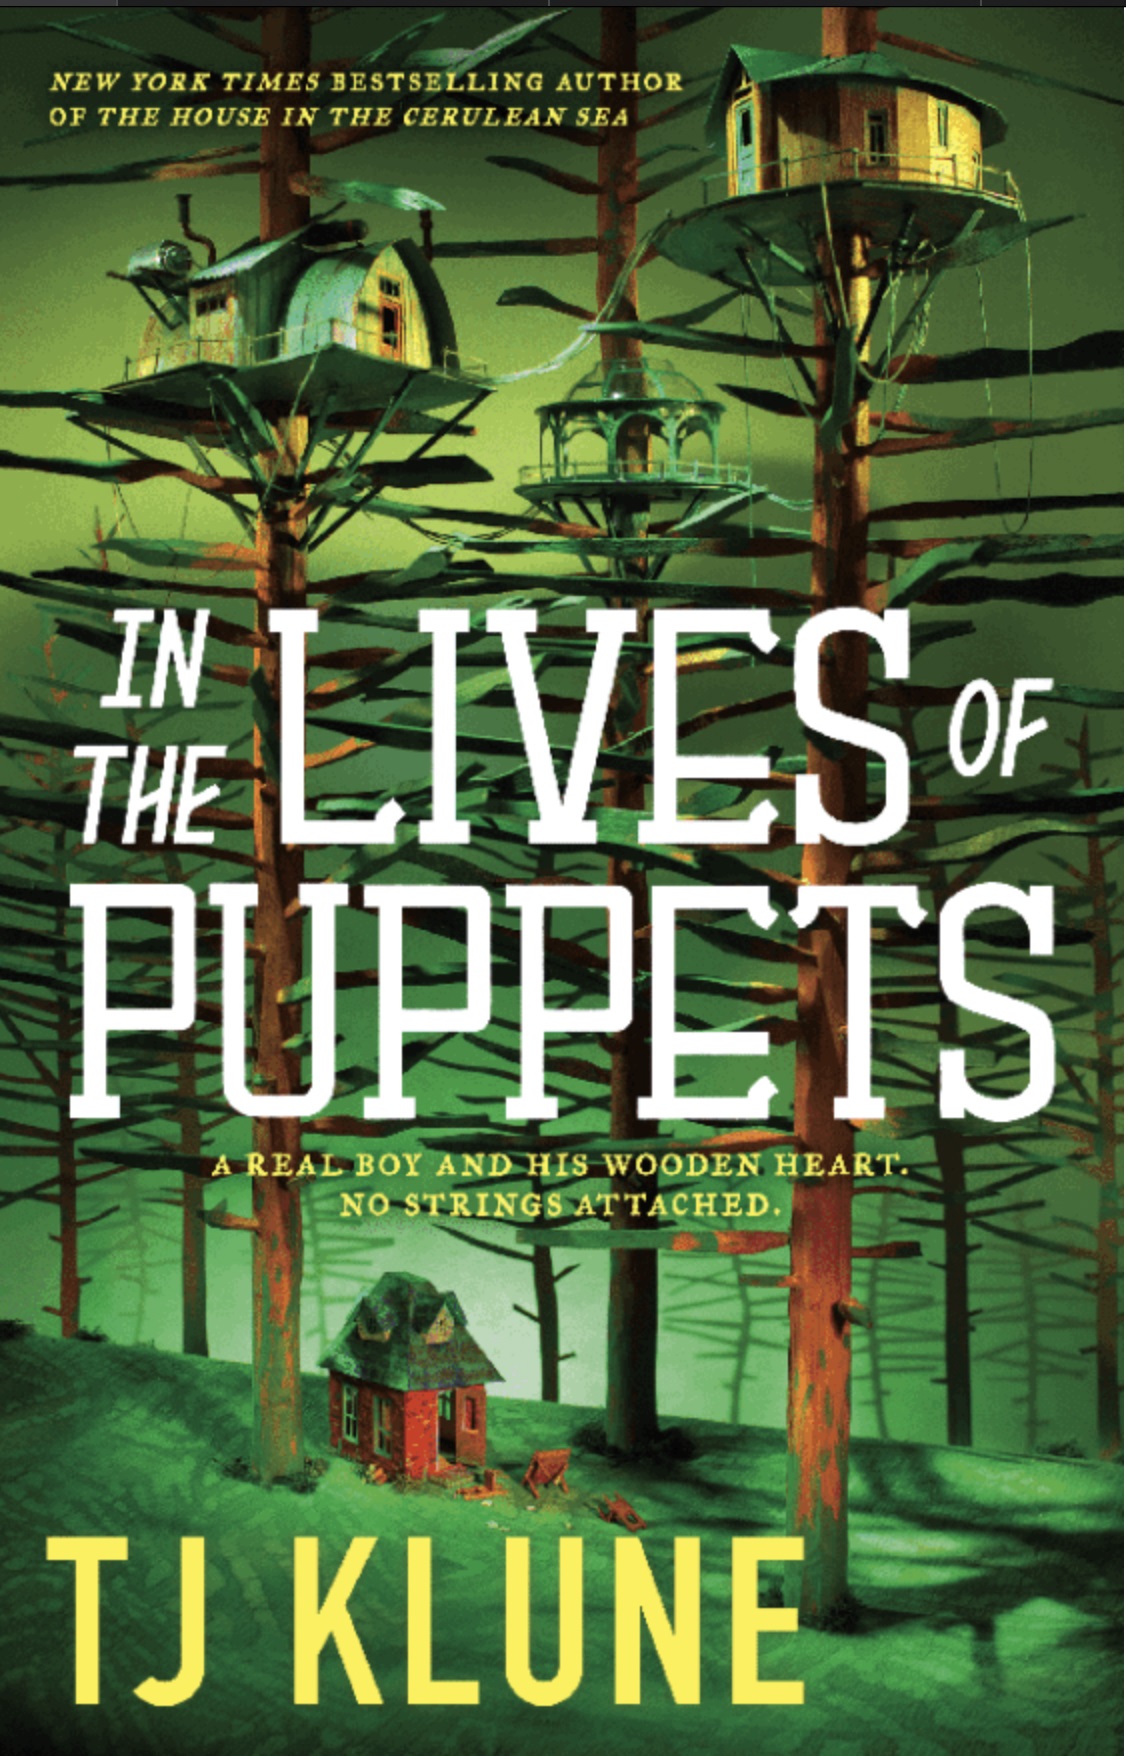 In the Lives of Puppets by T.J. Klune